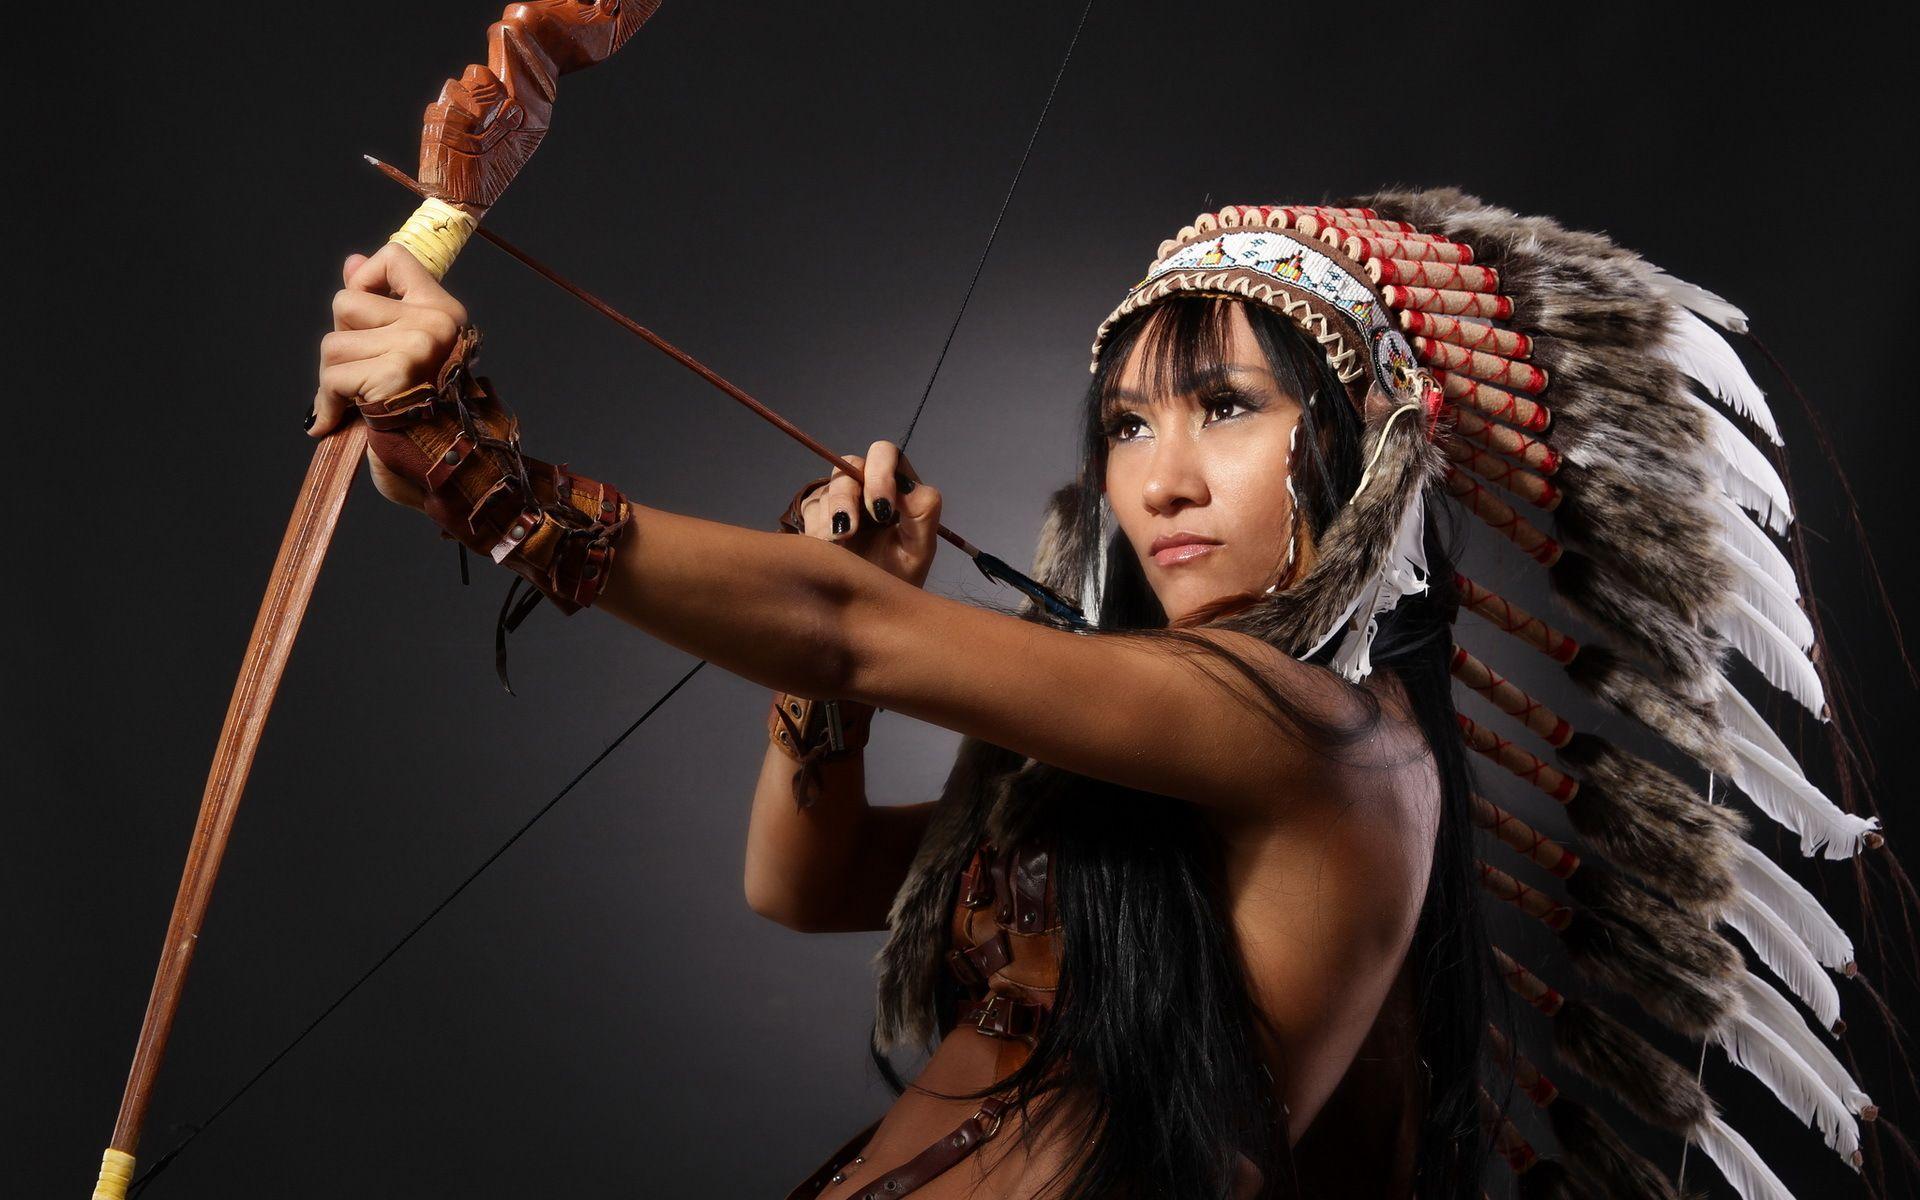 Wallpaper.wiki Girl Native American Background Free Download PIC